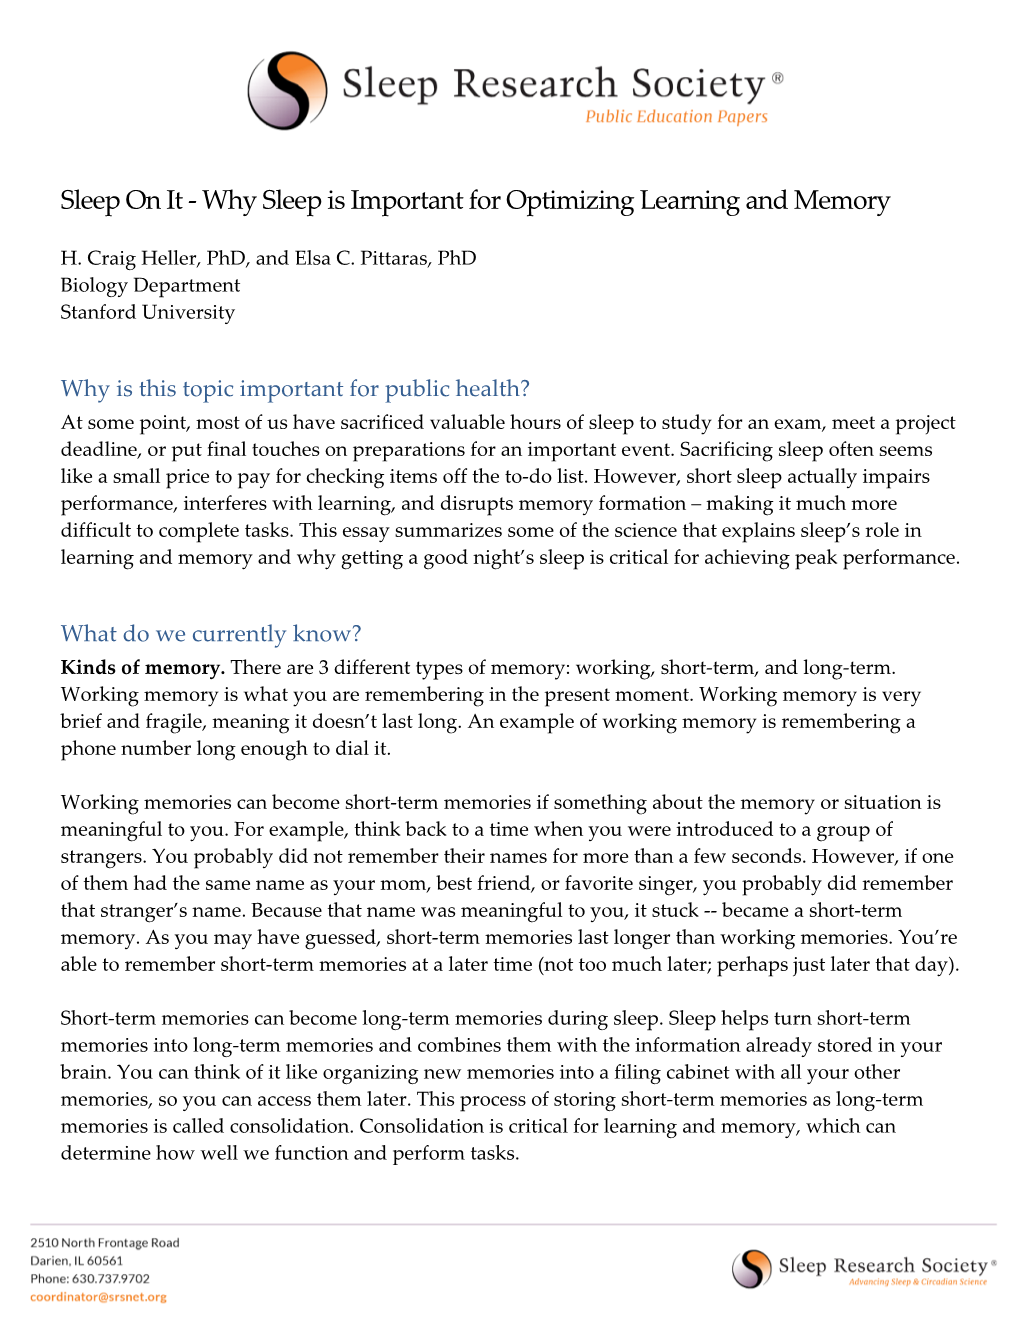 Why Sleep Is Important for Optimizing Learning and Memory